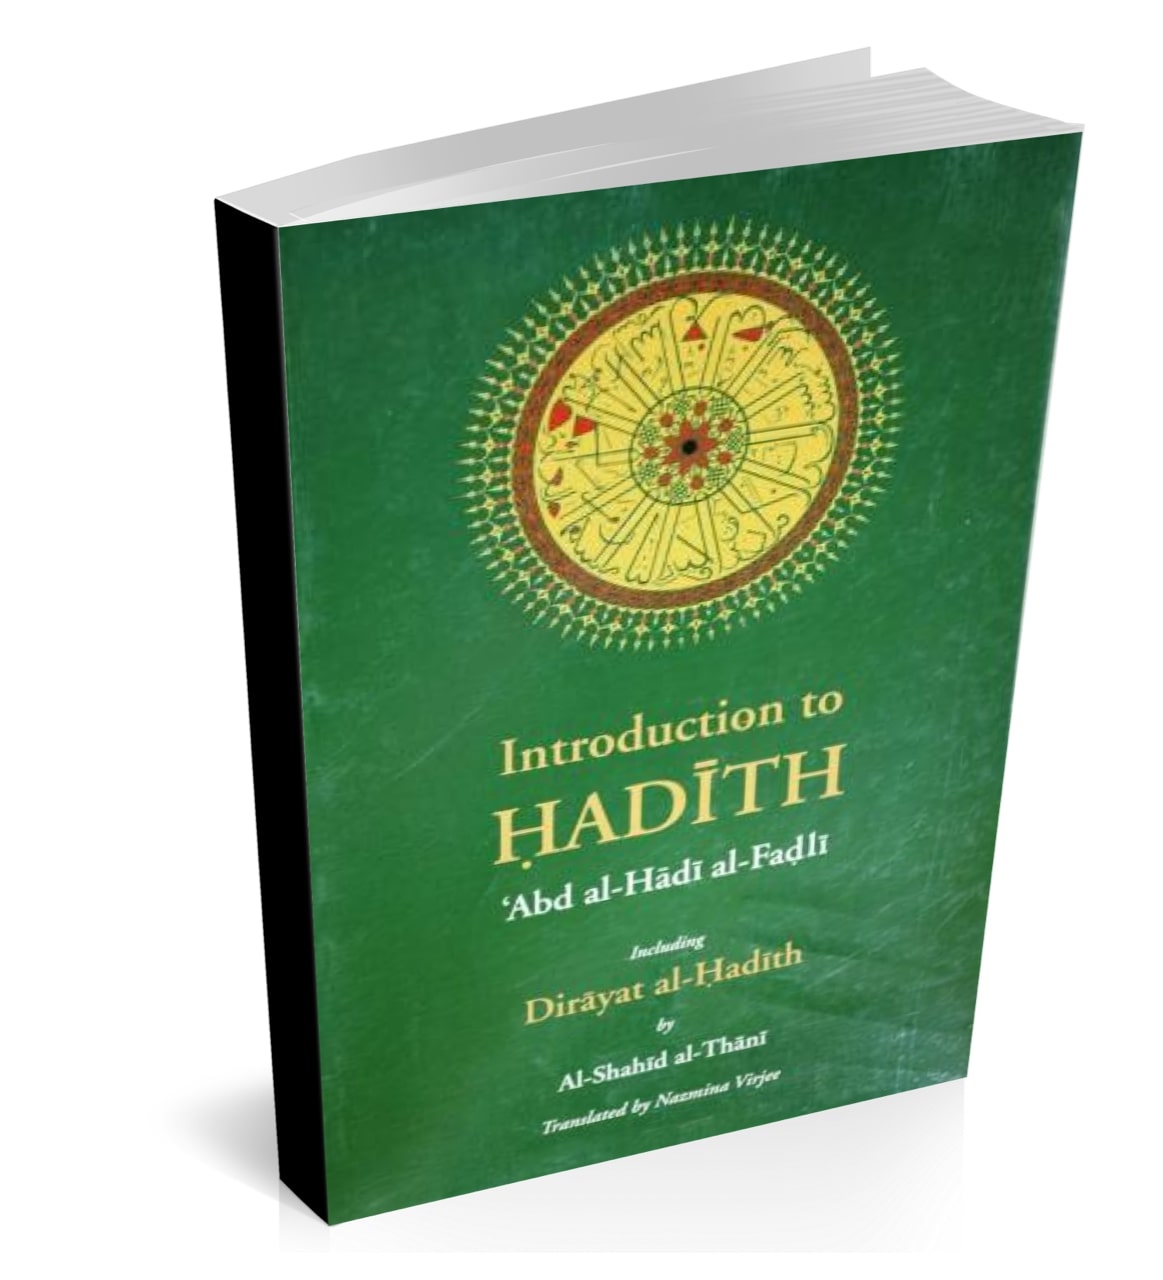 Science of Hadith